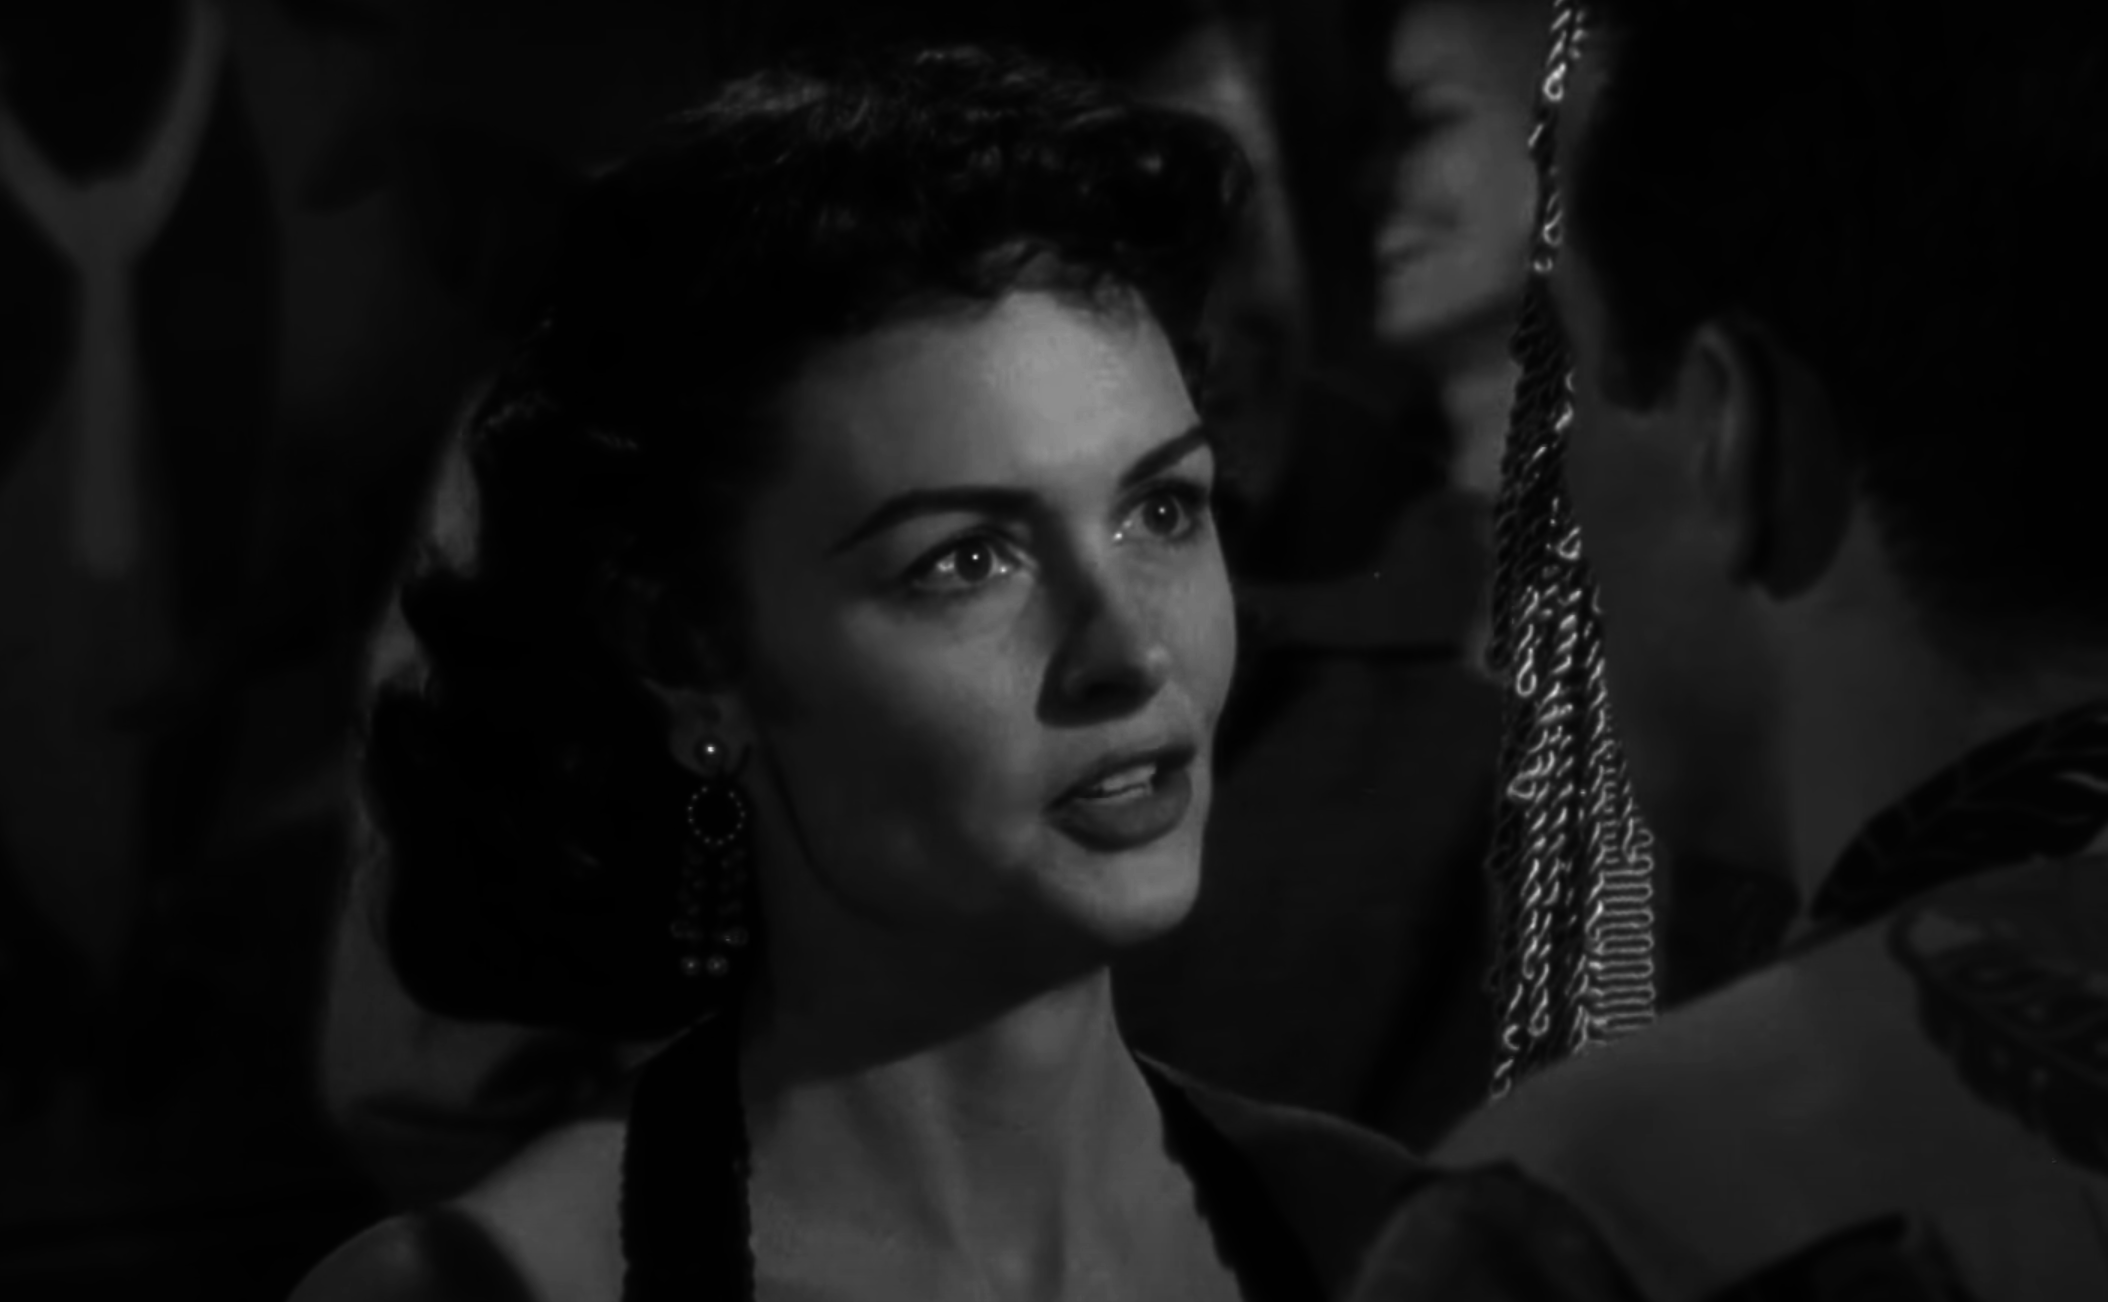 Woman in vintage attire facing a man, both looking at each other, scene from an old movie